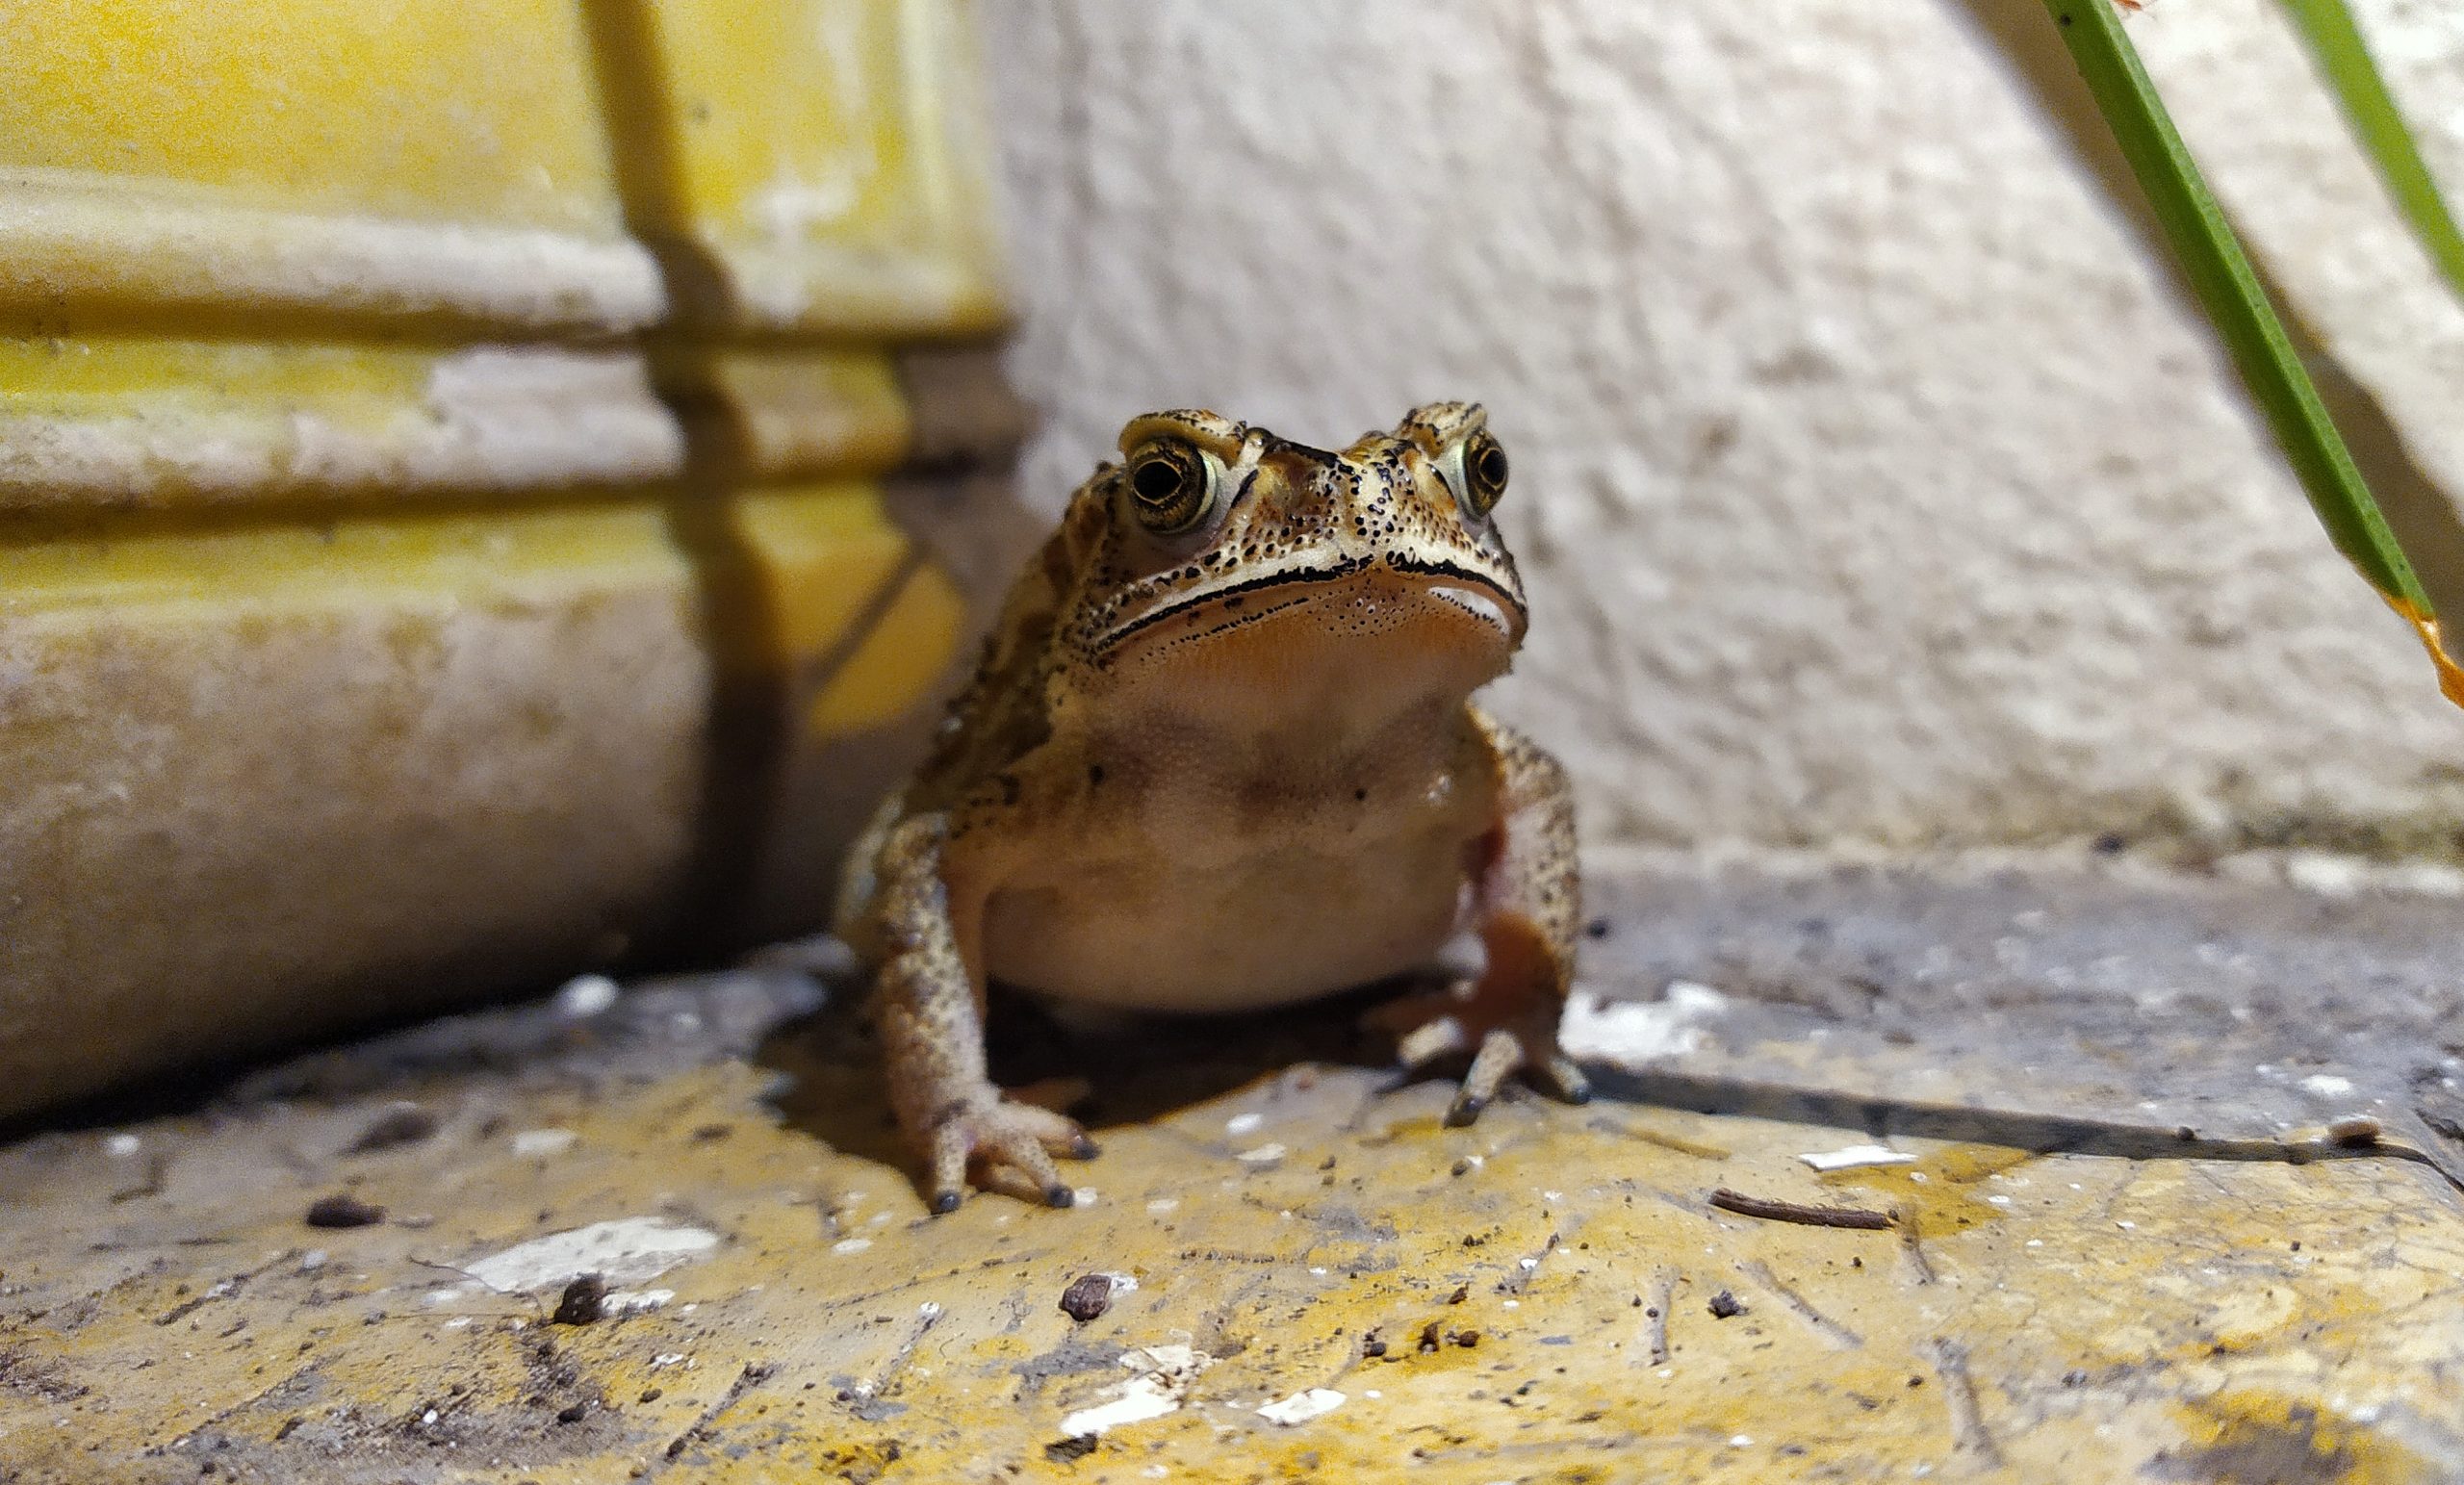 A frog in a corner